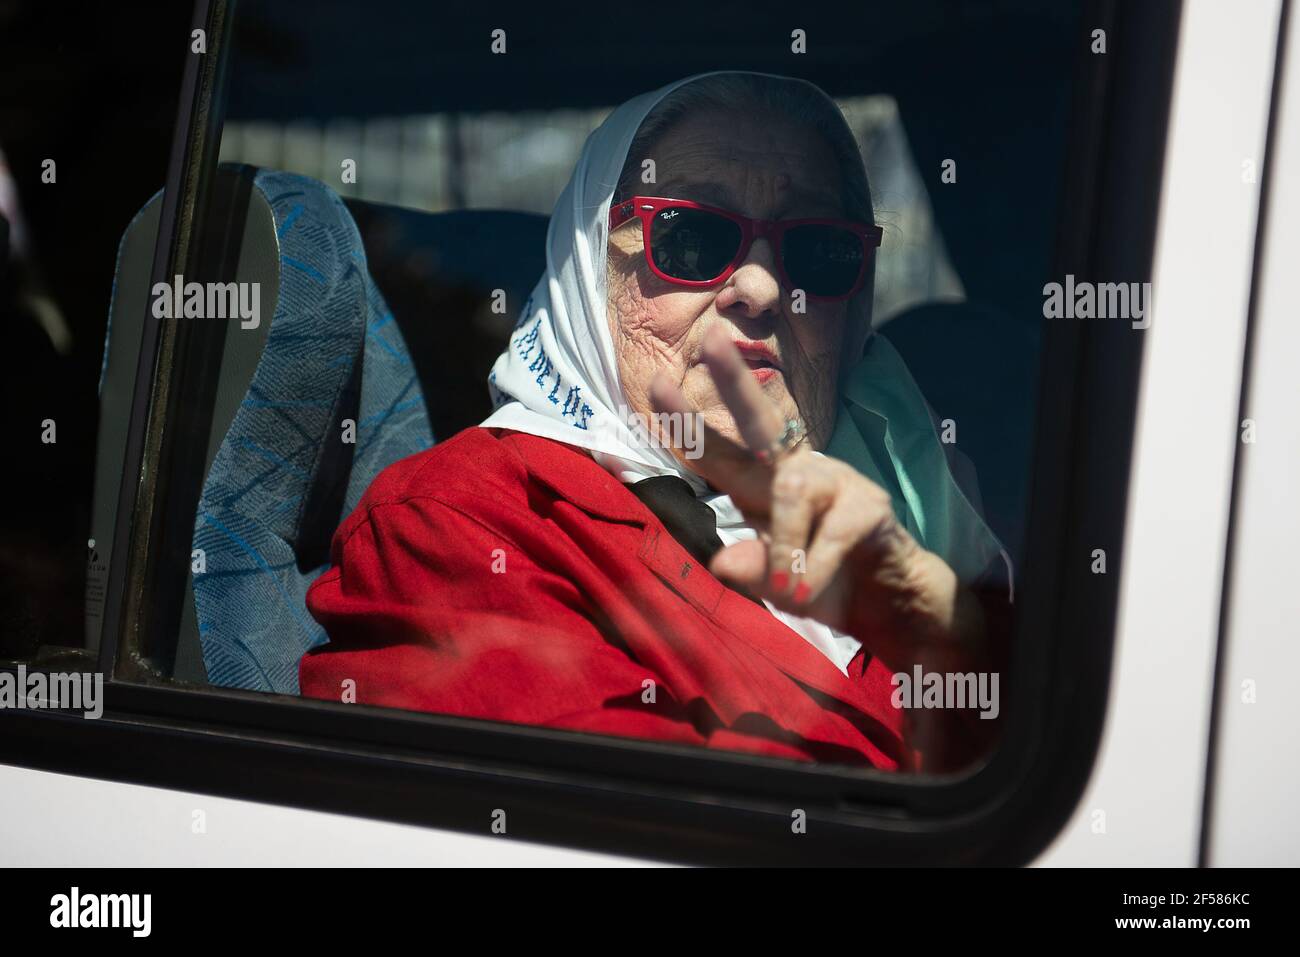 Hebe de Bonafini, president of Mothers of the Plaza de Mayo.The Mothers of Plaza de Mayo returned to mobilize after more than a year. On the anniversary of the 1976 military coup in Argentina. Stock Photo